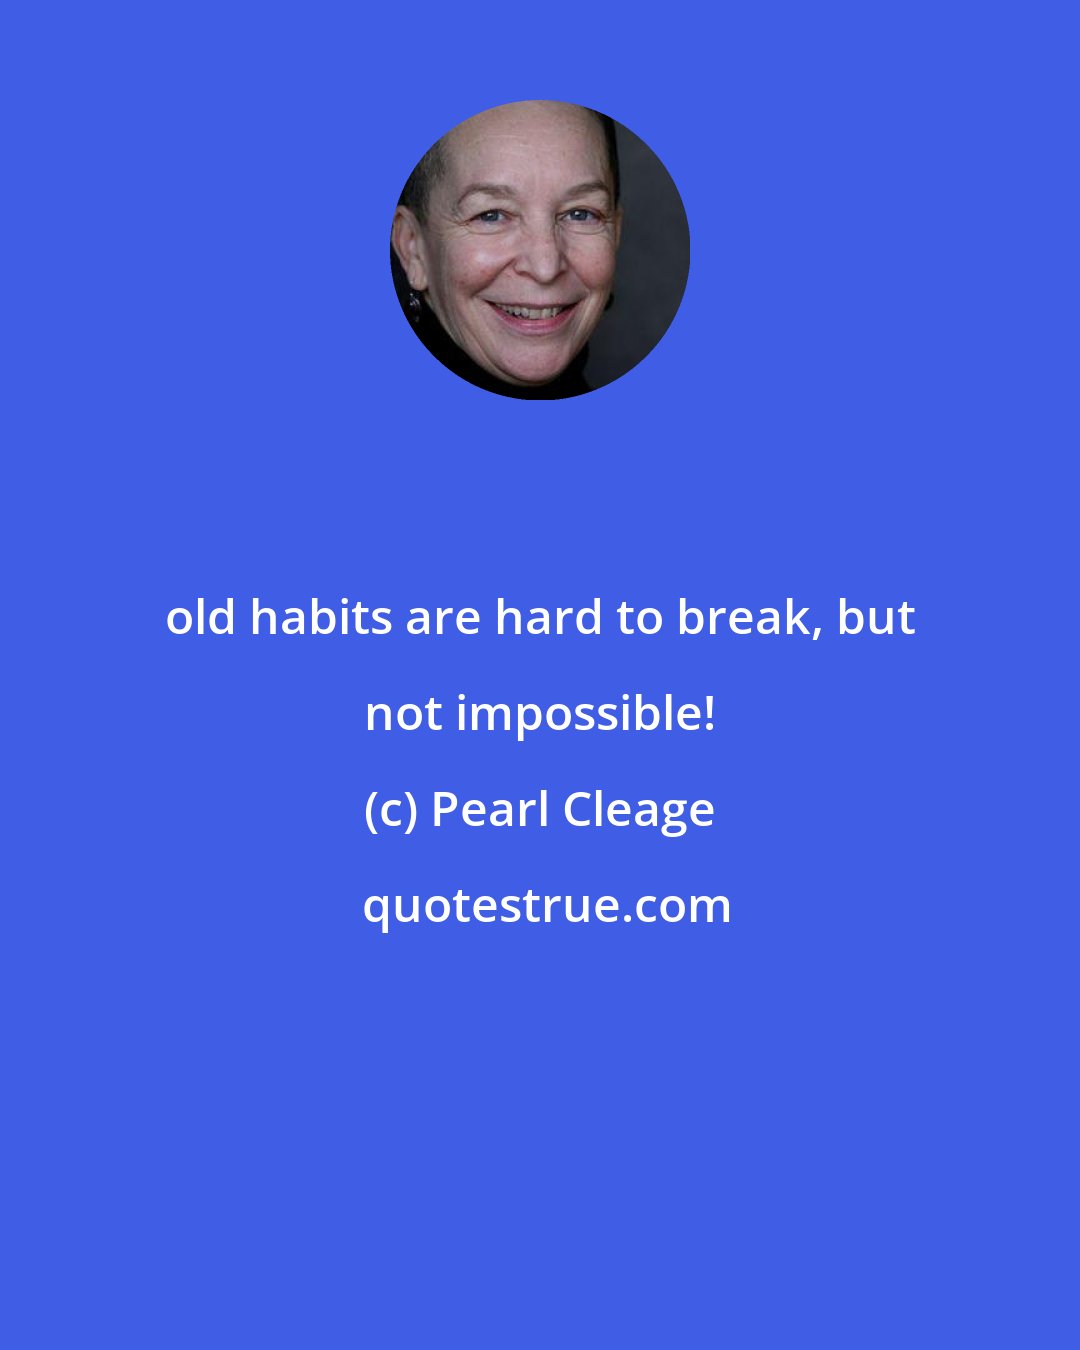 Pearl Cleage: old habits are hard to break, but not impossible!